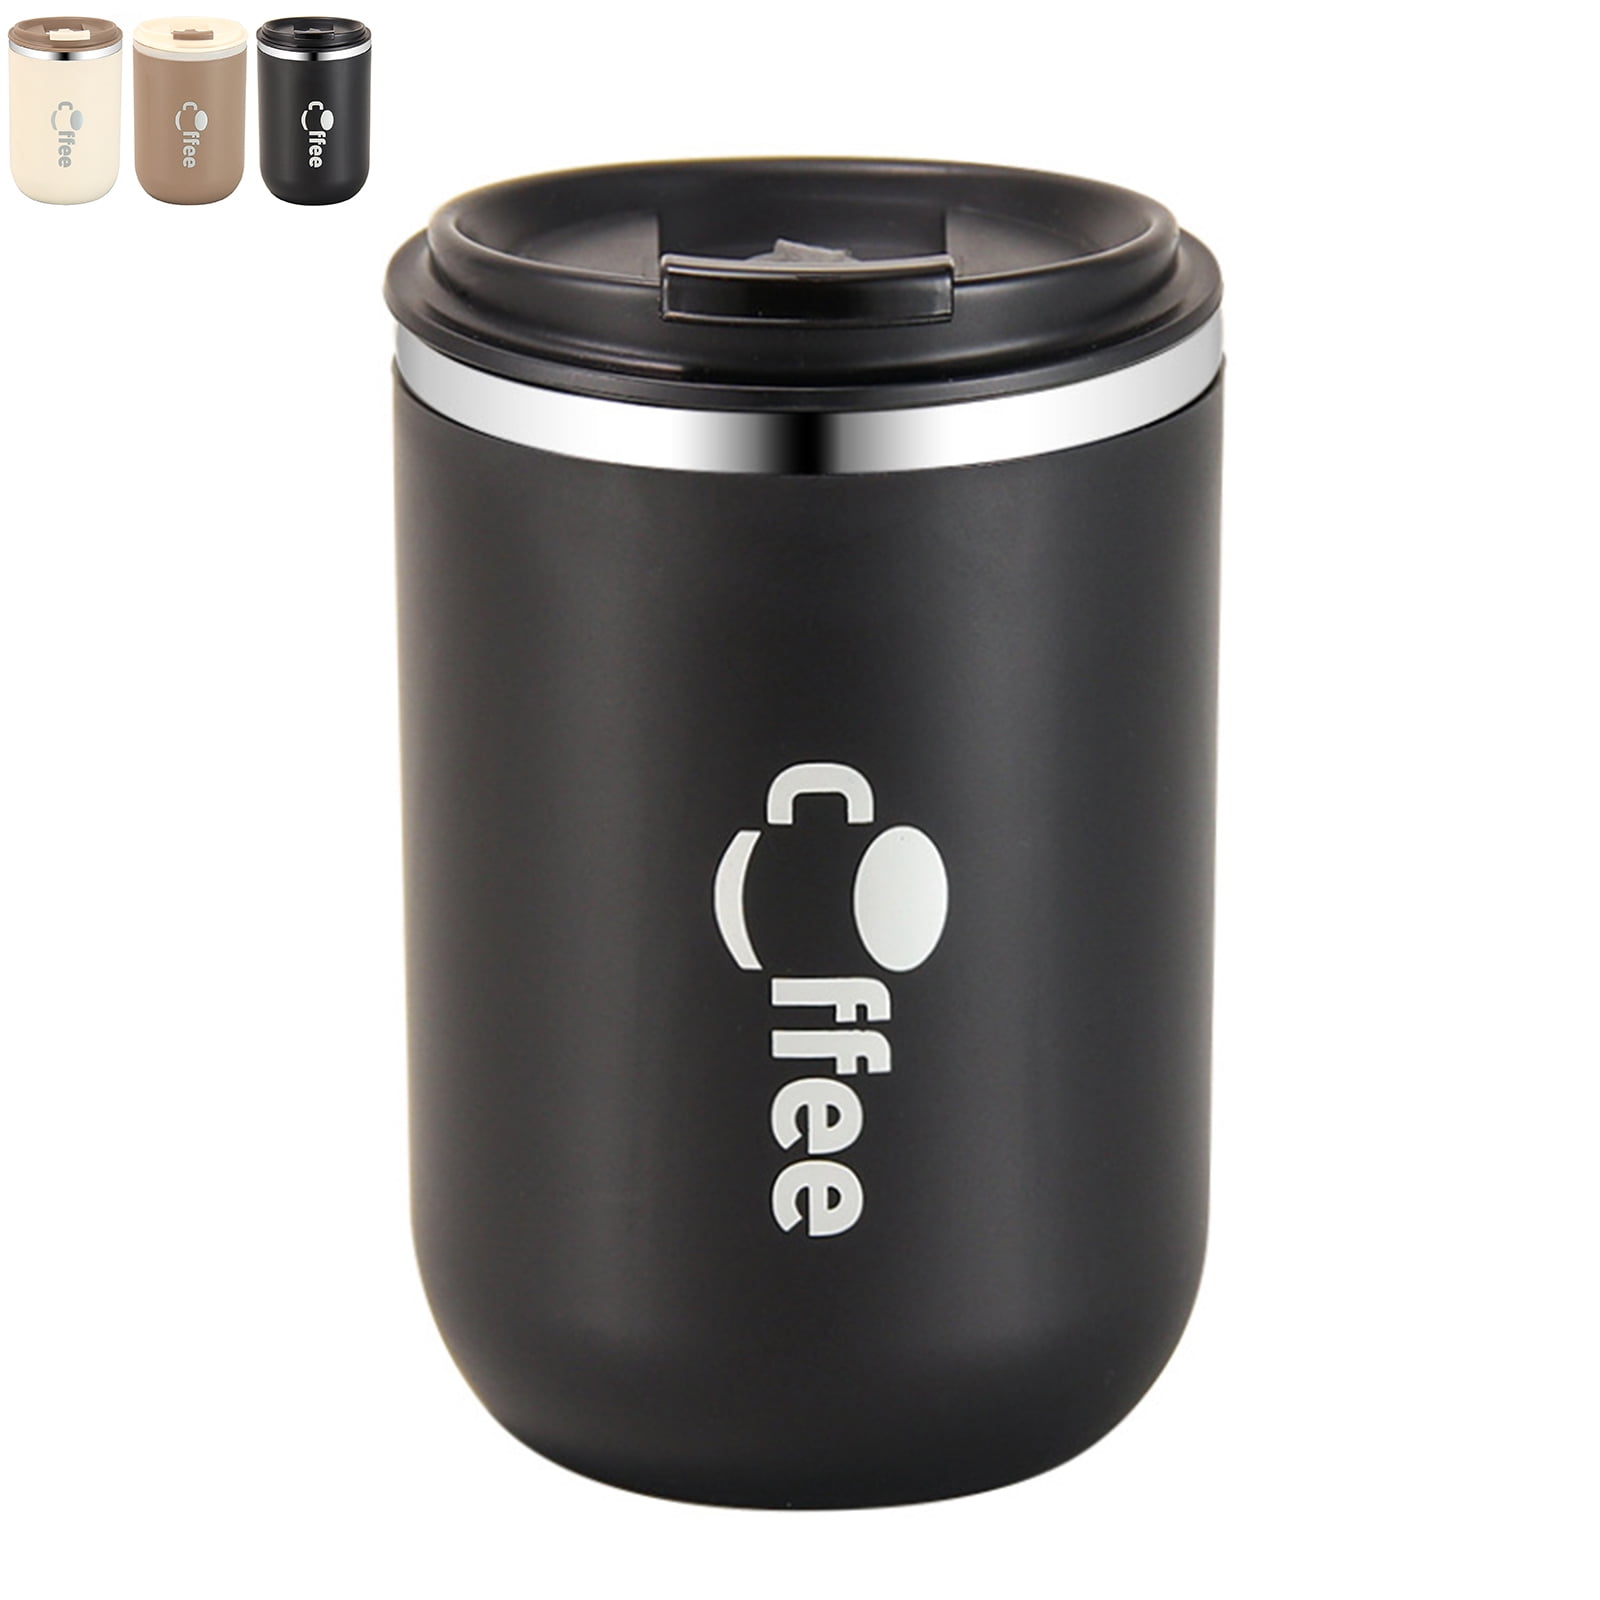 kaforto 12oz Insulated Coffee Travel Mug Stainless Steel Vacuum Coffee Cup  Leakproof with Screw Lid …See more kaforto 12oz Insulated Coffee Travel Mug